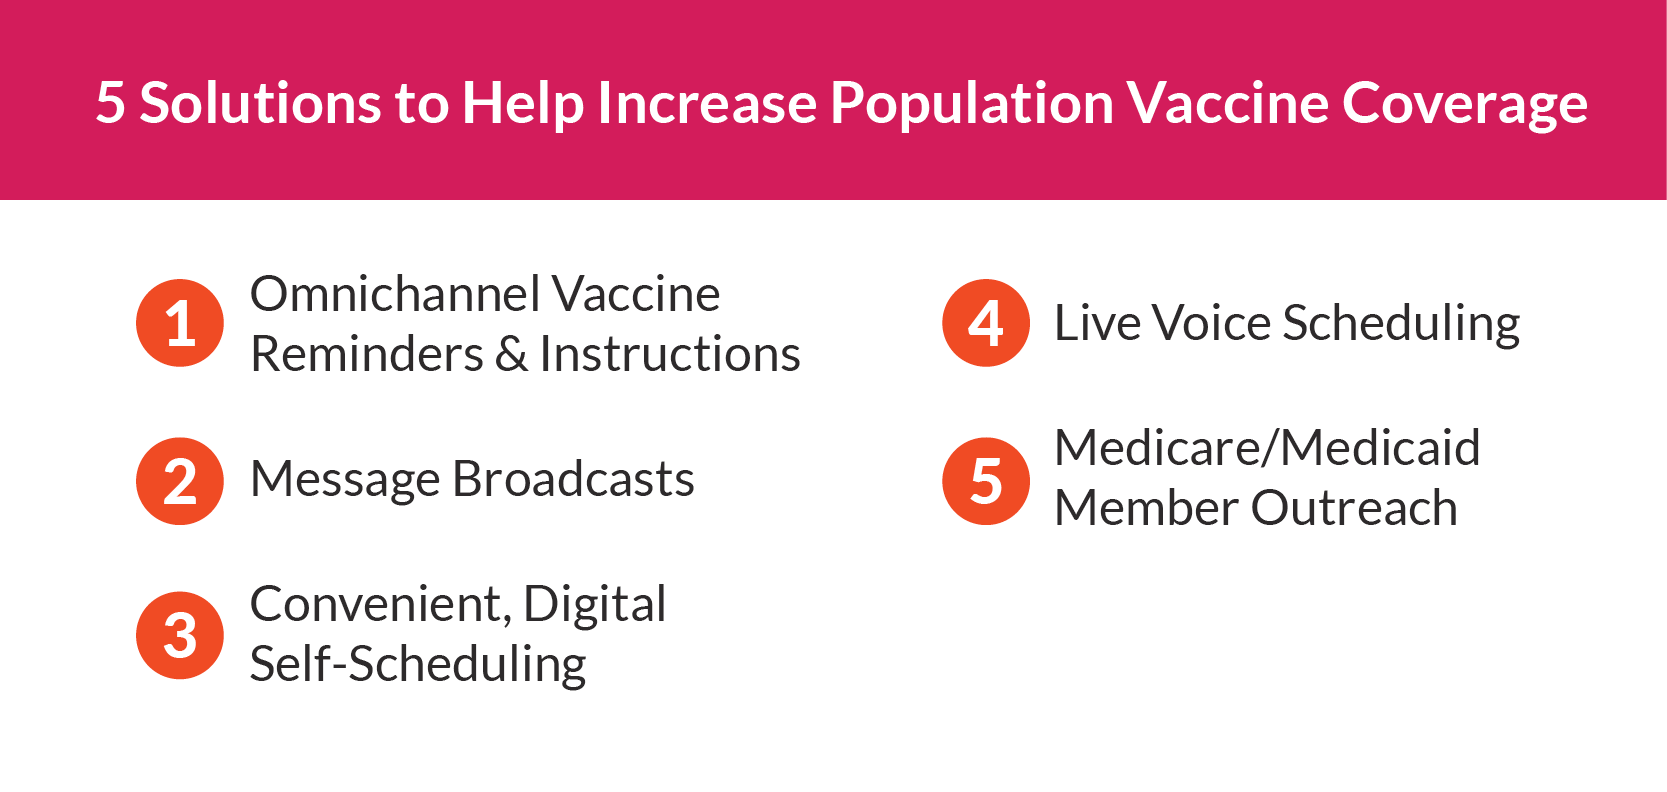 5 solutions to help increase population vaccine coverage 1 omnichcnnel vaccine reminders and instructions 2 message broadcaste 3 convenient digital self-scheduling 4 live voice scheduling 5 medicare medicaid member outreach